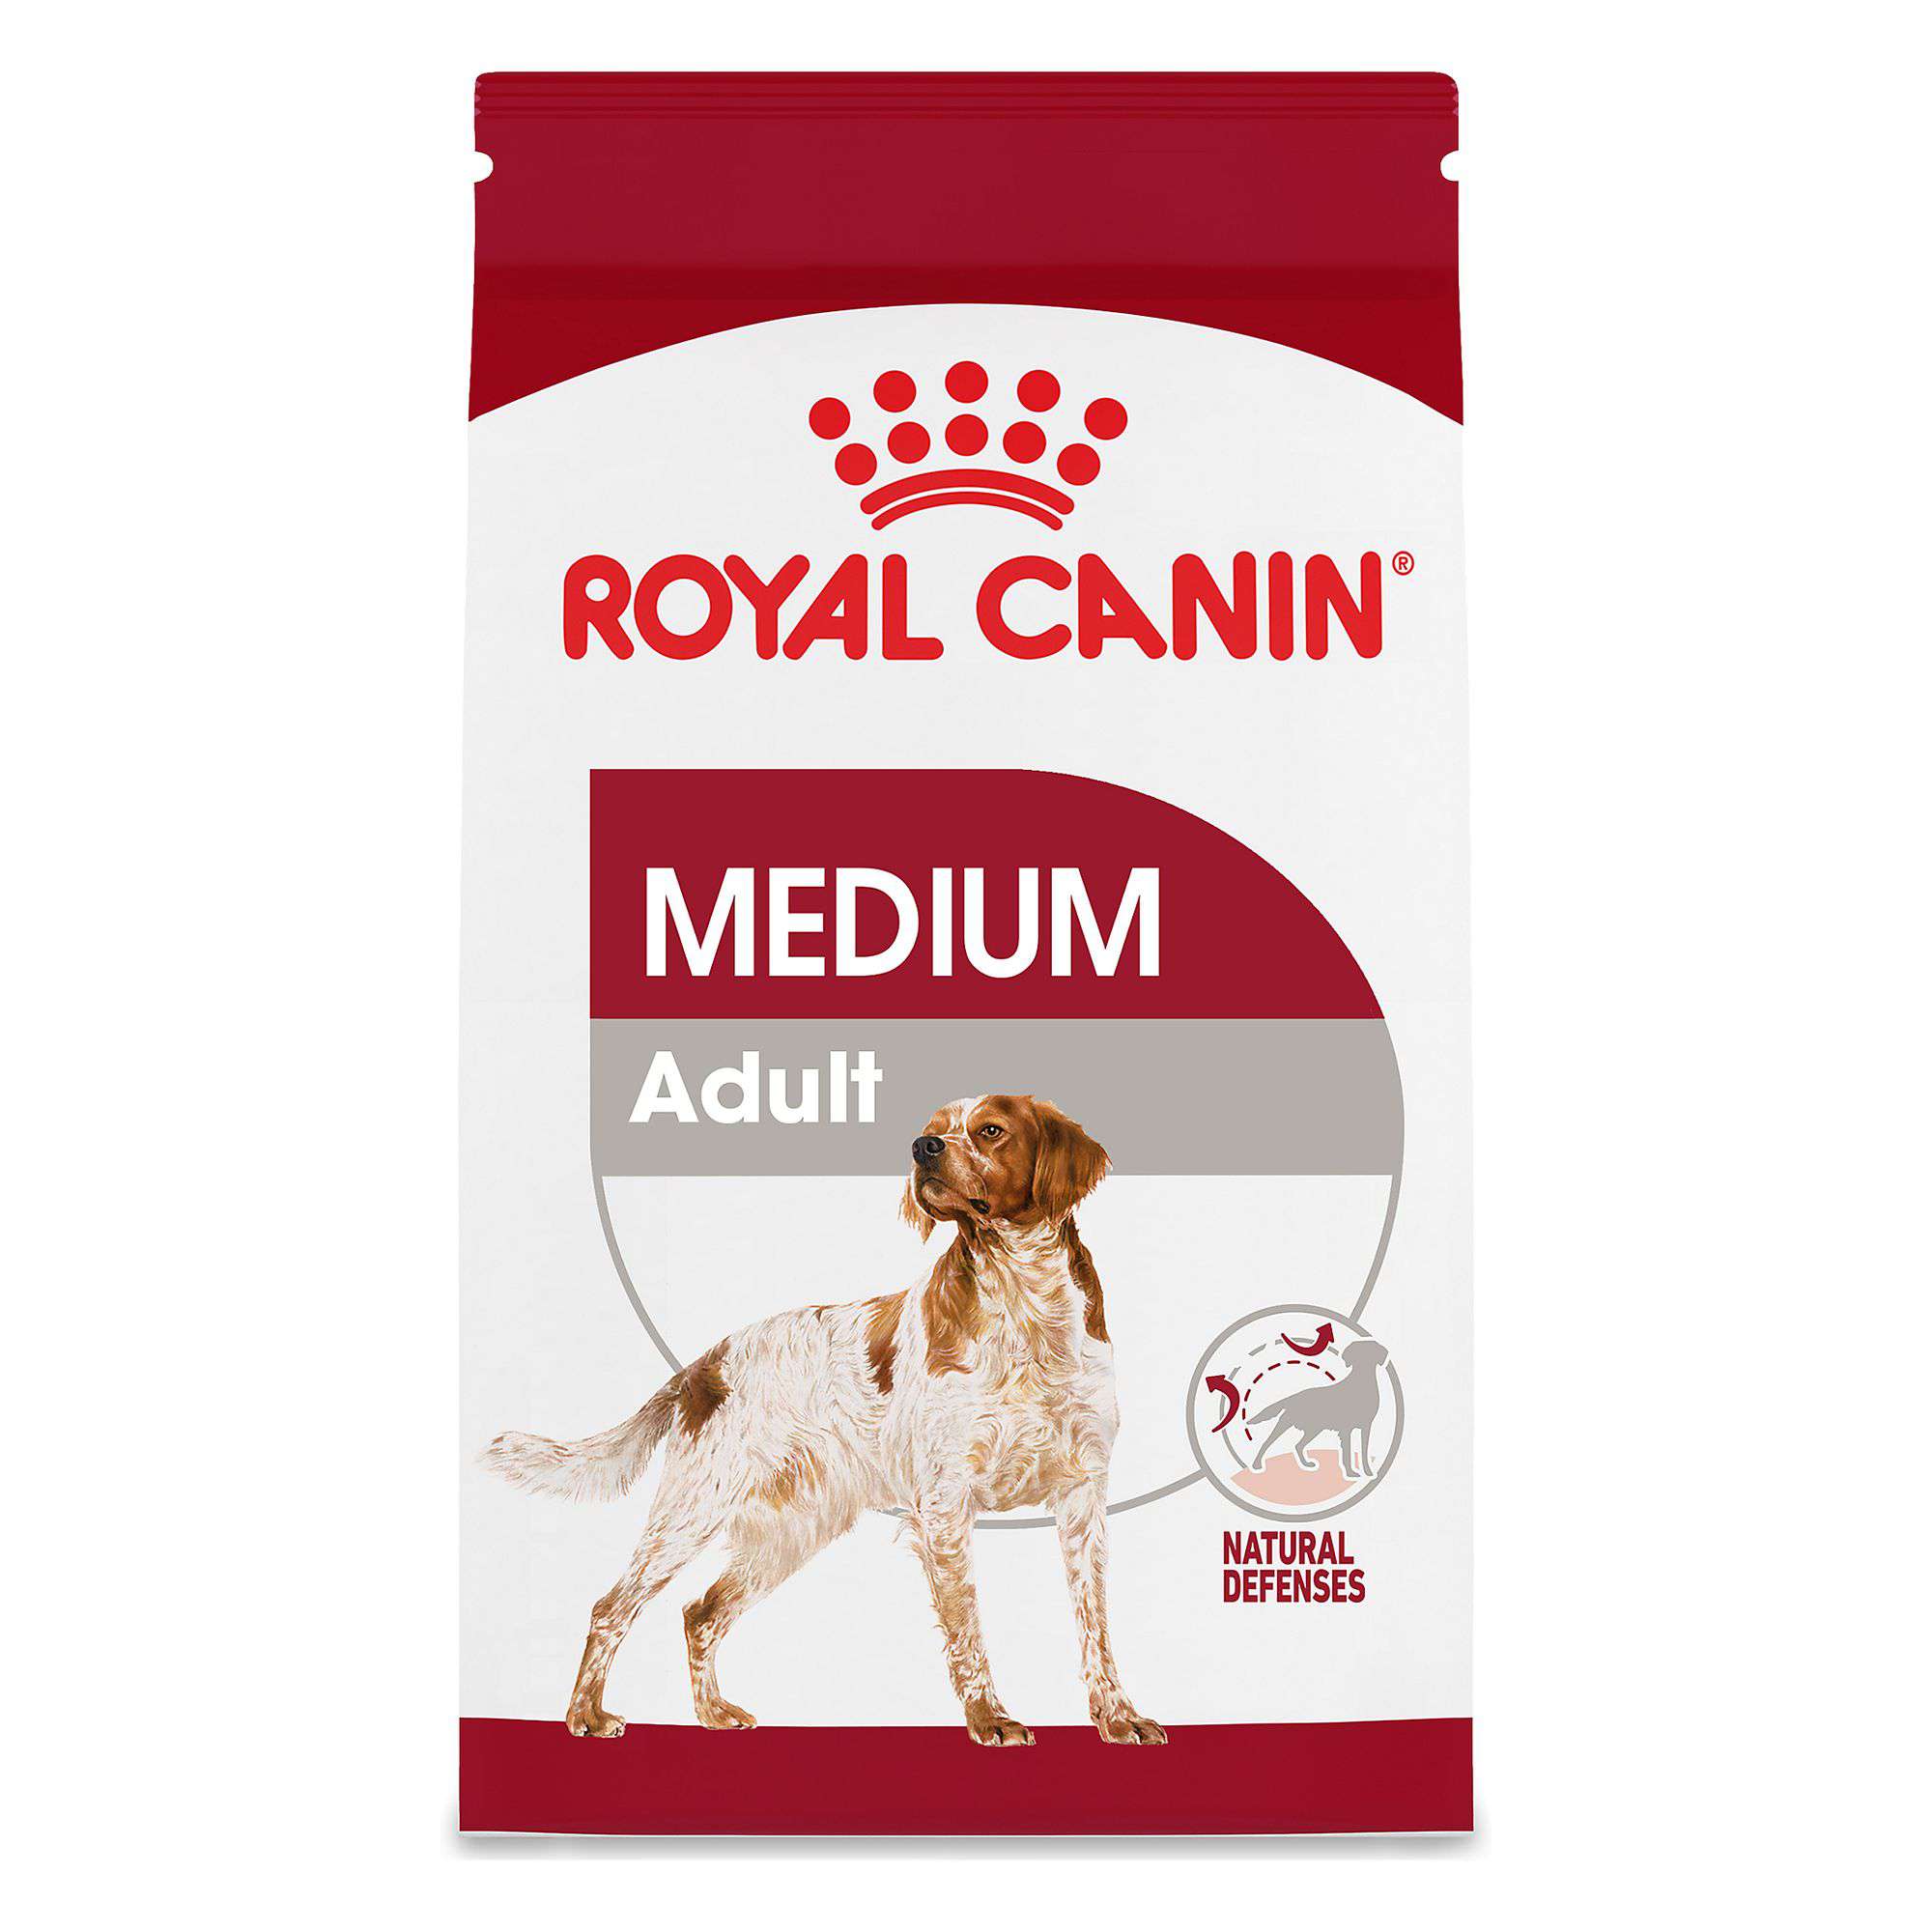 Do vets recommend Royal Canin?